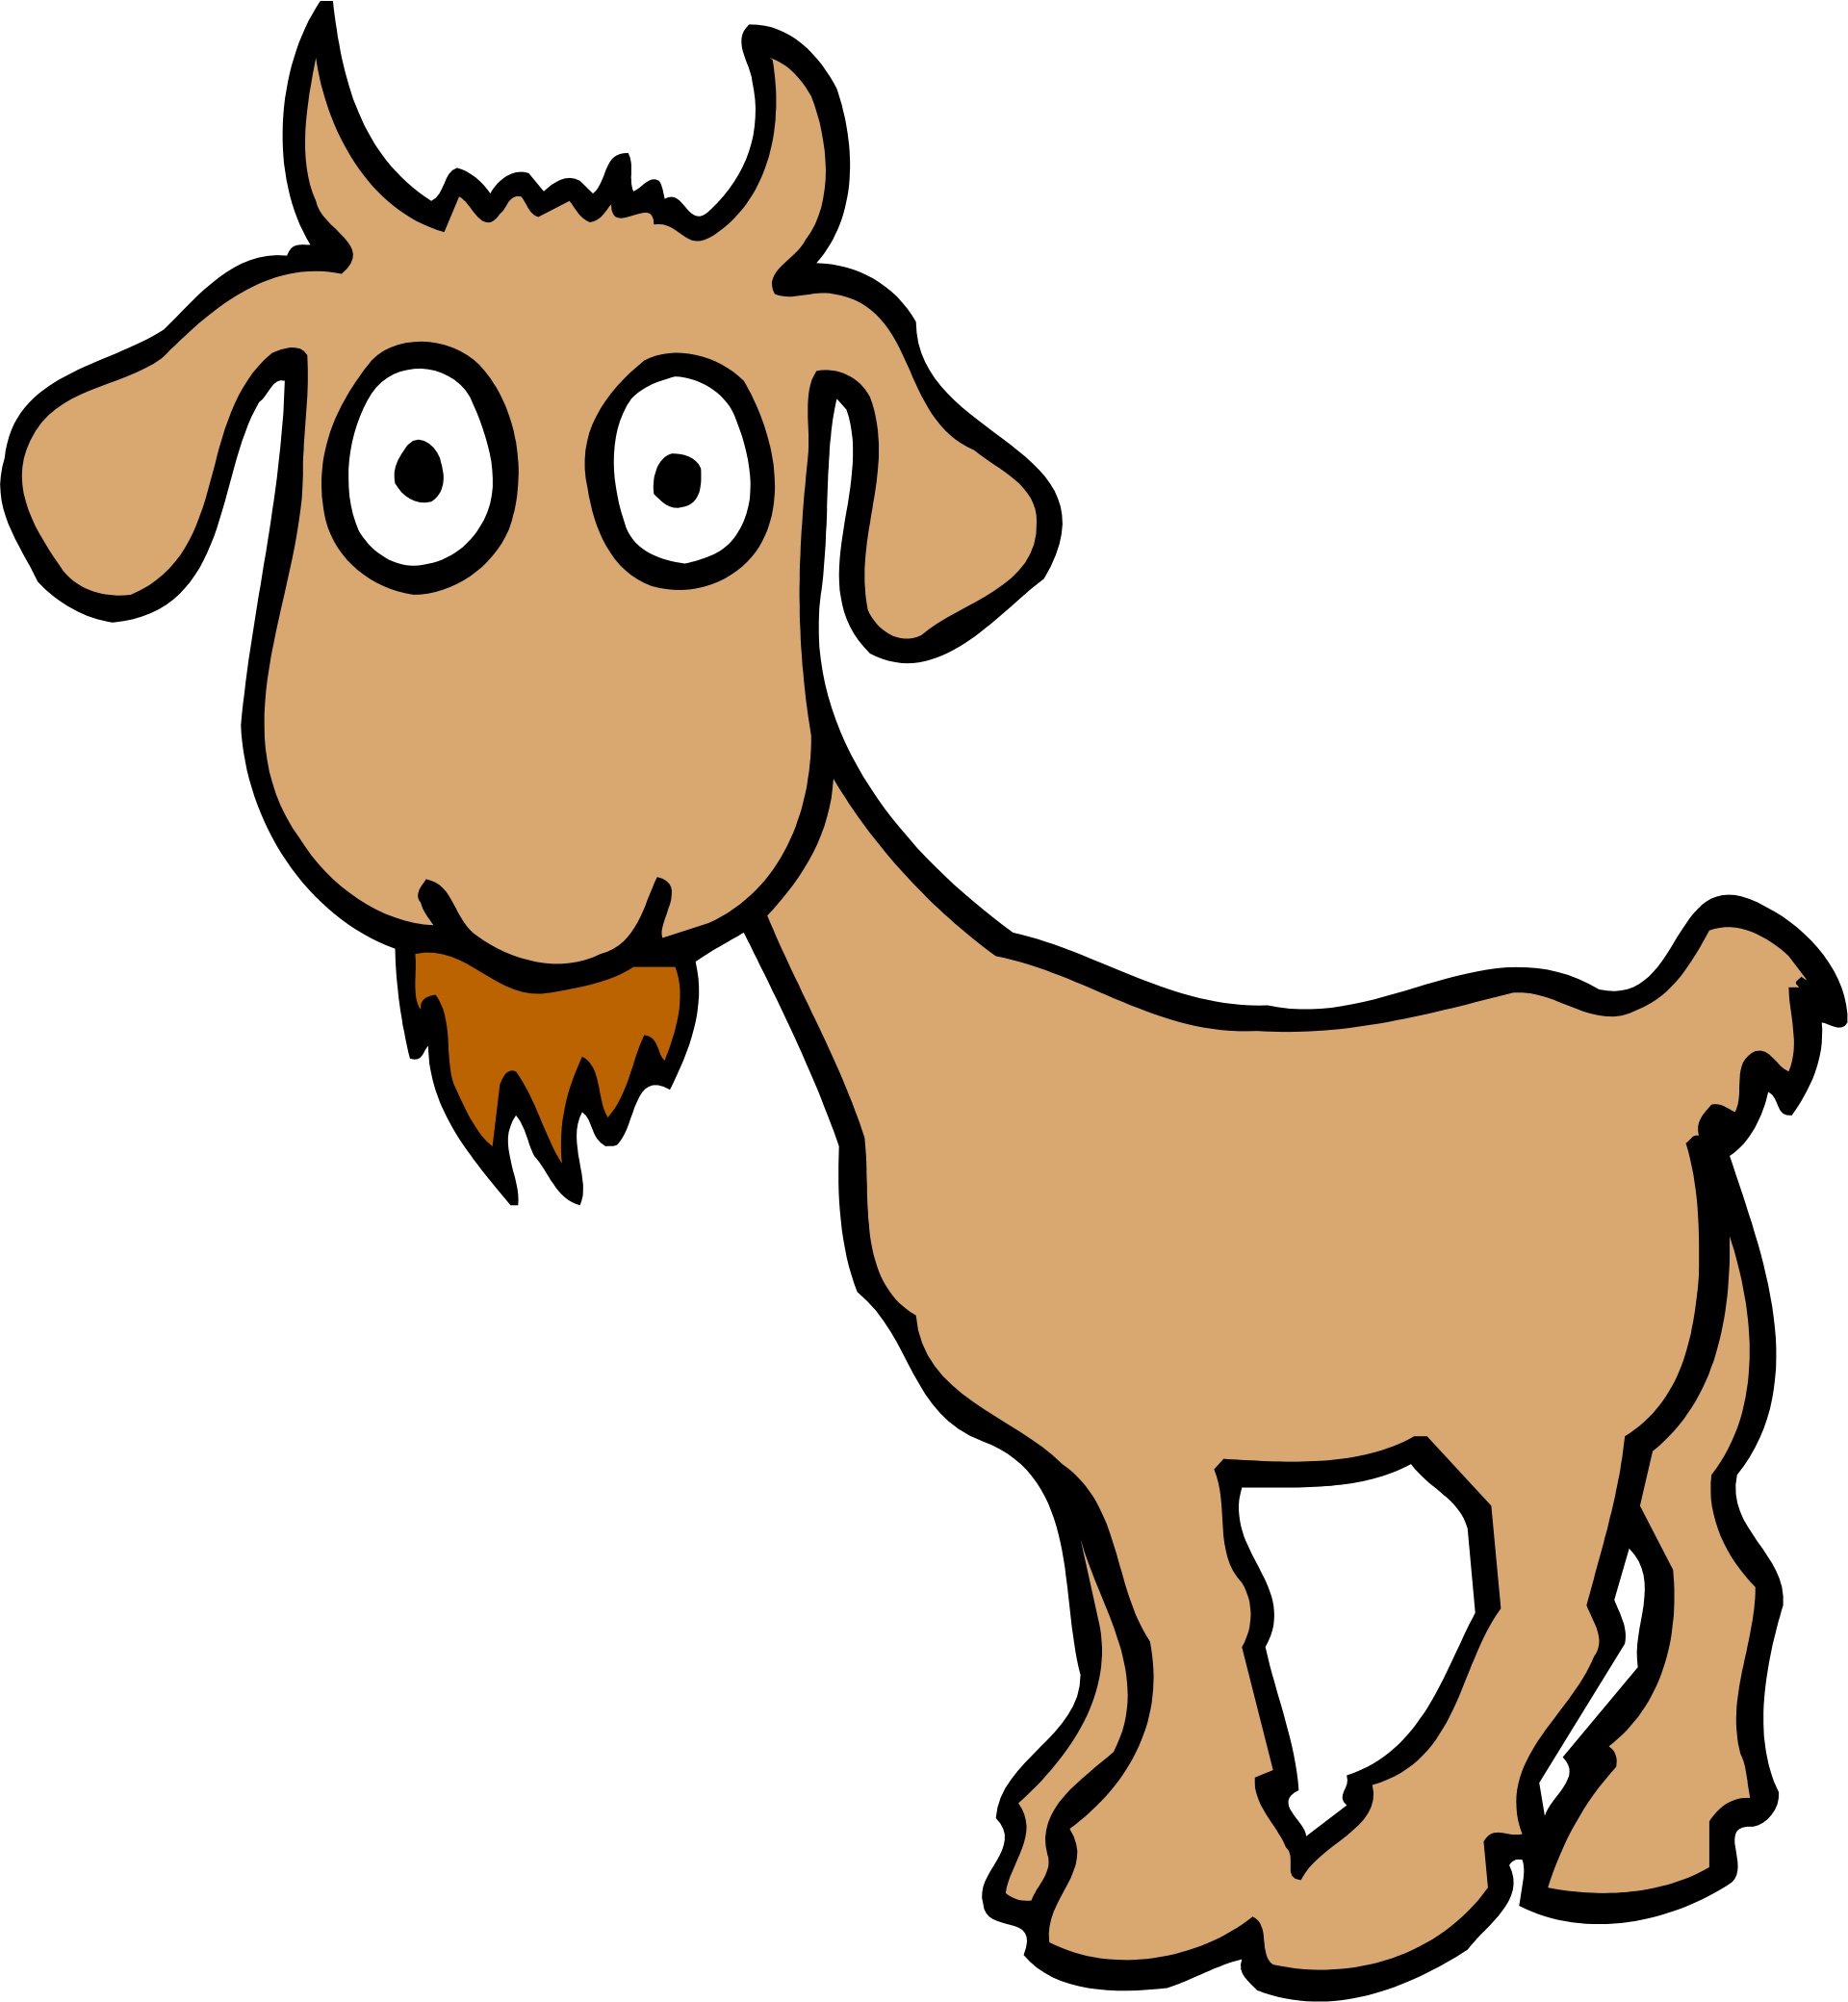 Pictures Of Cartoon Farm Animals - ClipArt Best